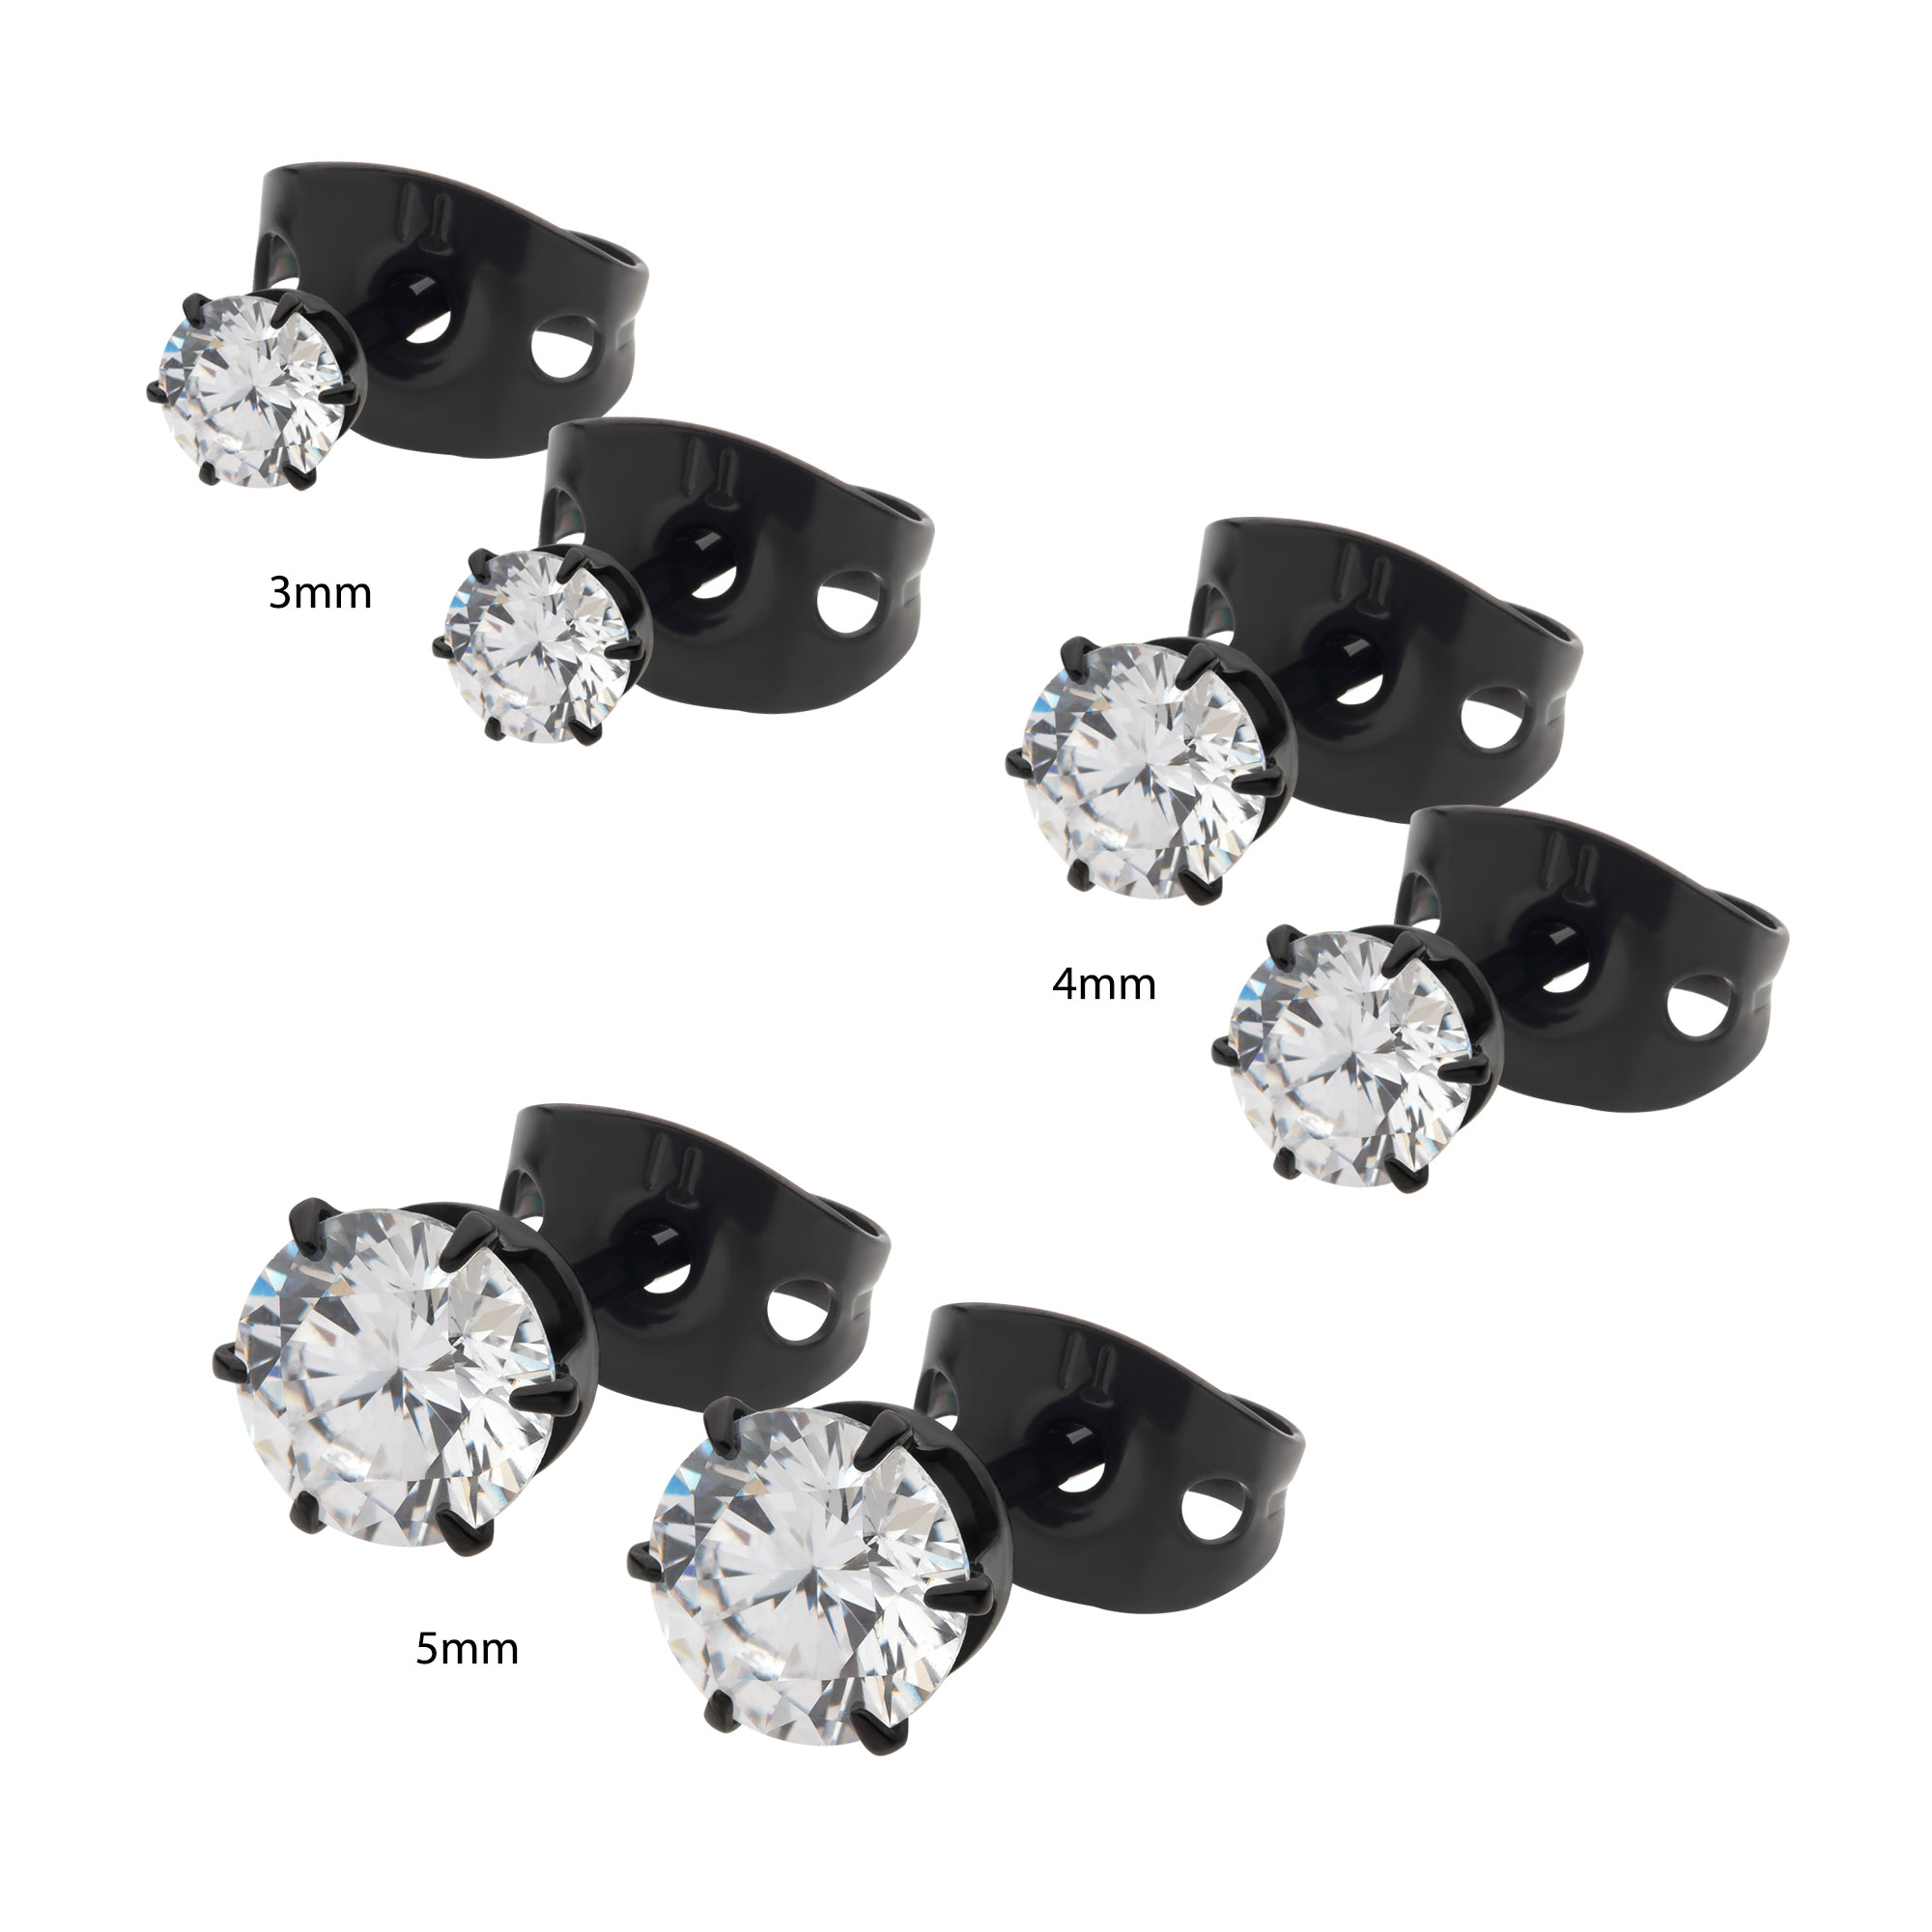 20g Black Plated Titanium Post and Butterfly Back with 6-Prong Set CZ Stud Earrings Image 3 Spath Jewelers Bartow, FL